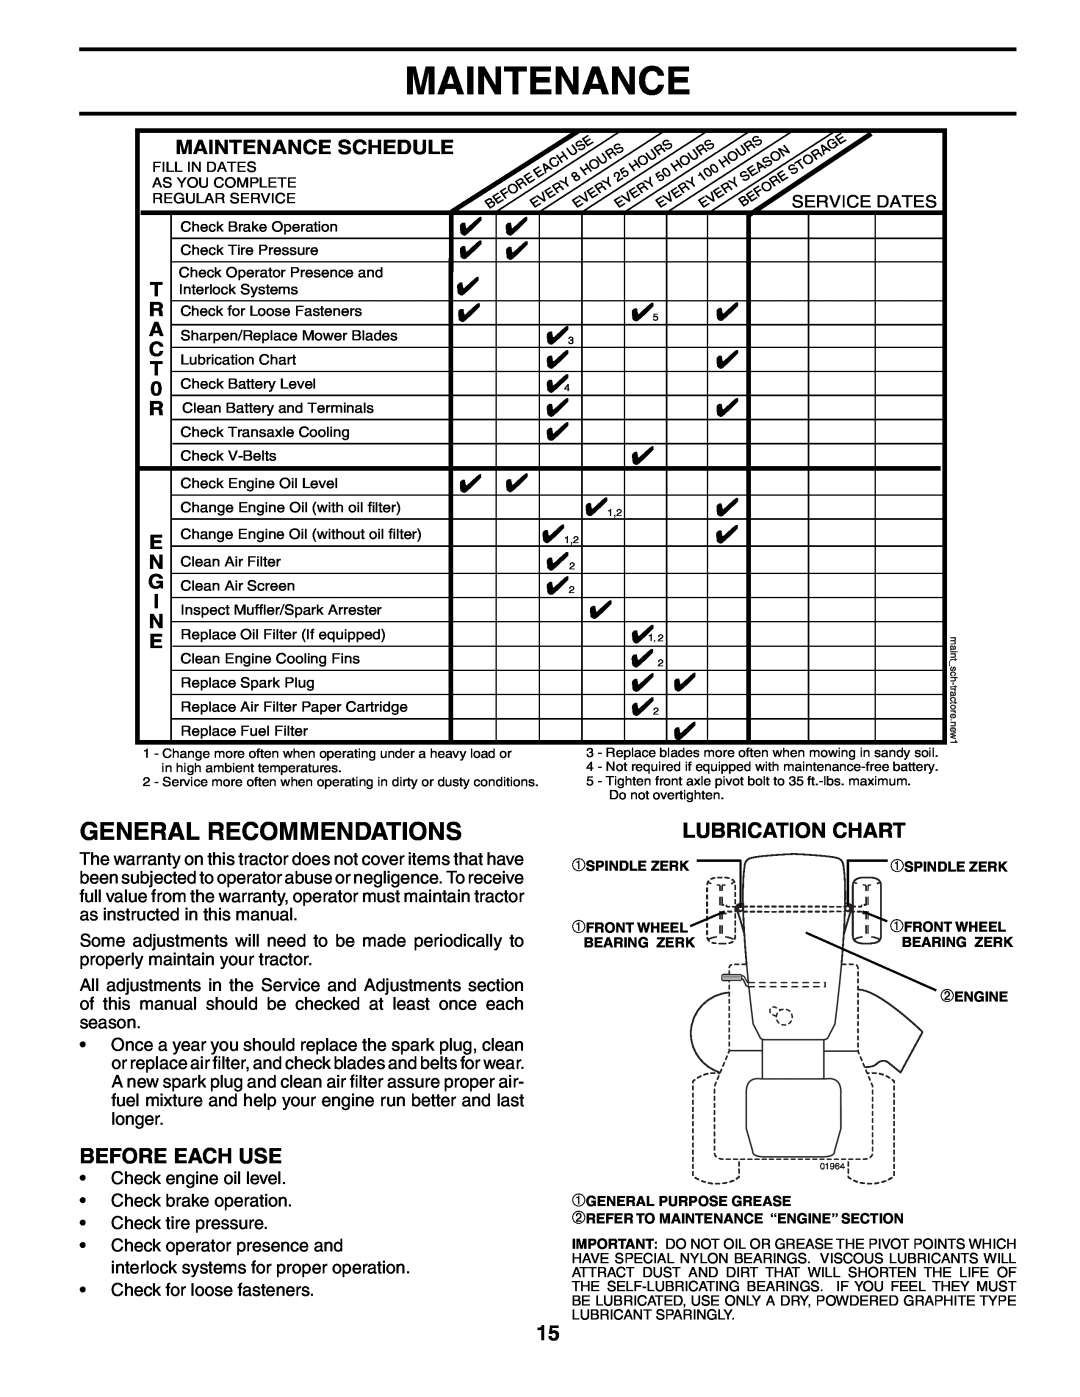 Poulan 187301 manual General Recommendations, Before Each Use, Lubrication Chart, Maintenance Schedule 